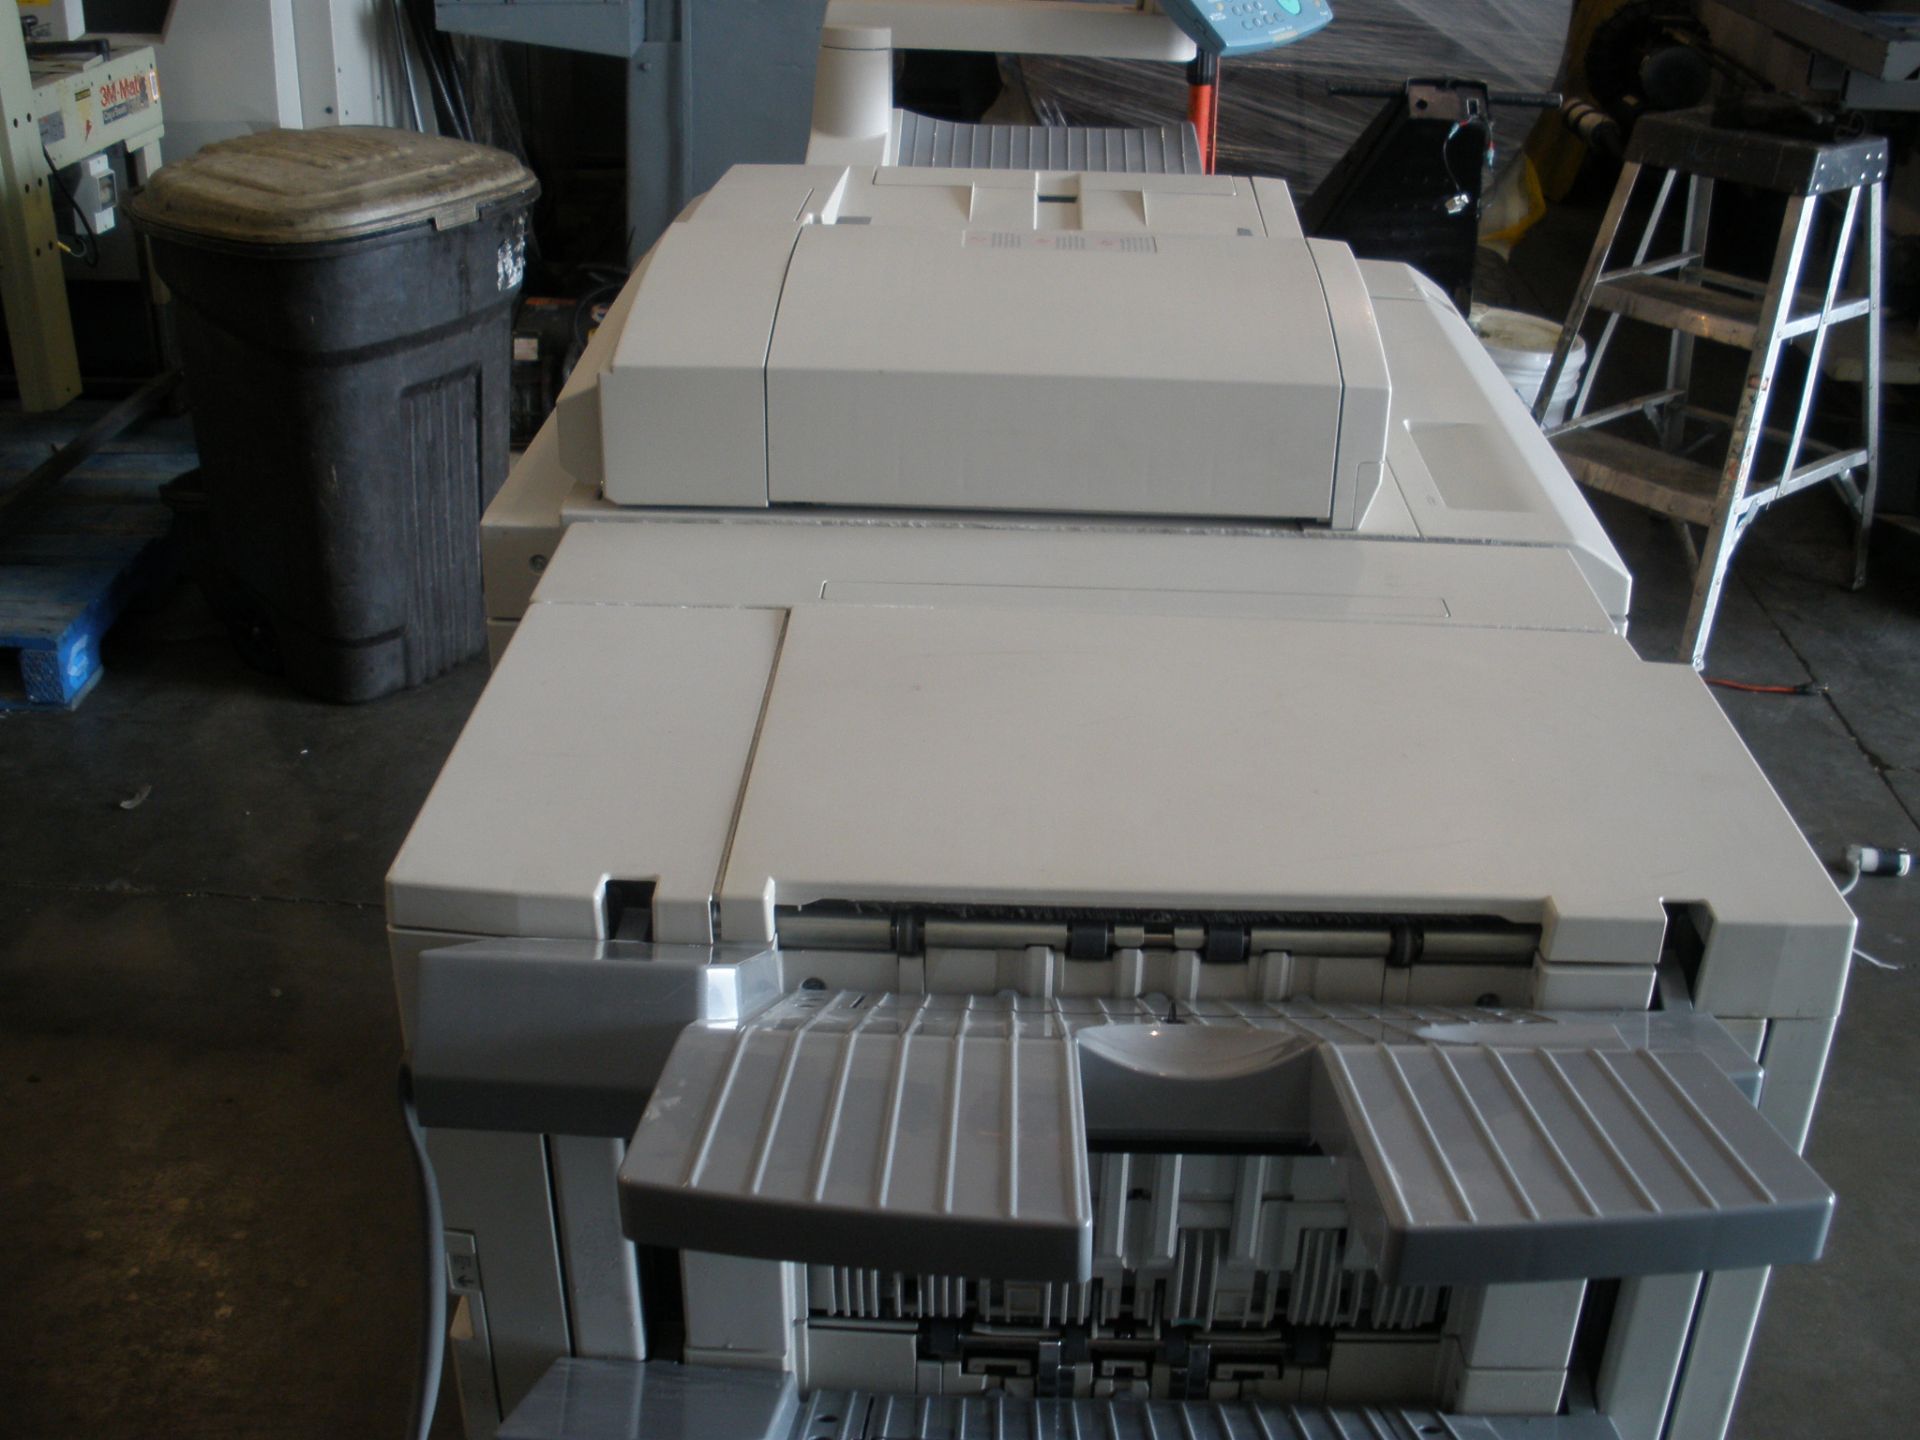 Cannon Image Runner Model 105 Copy Machine Counter 13299482 Copy’s W/Video - Image 5 of 12